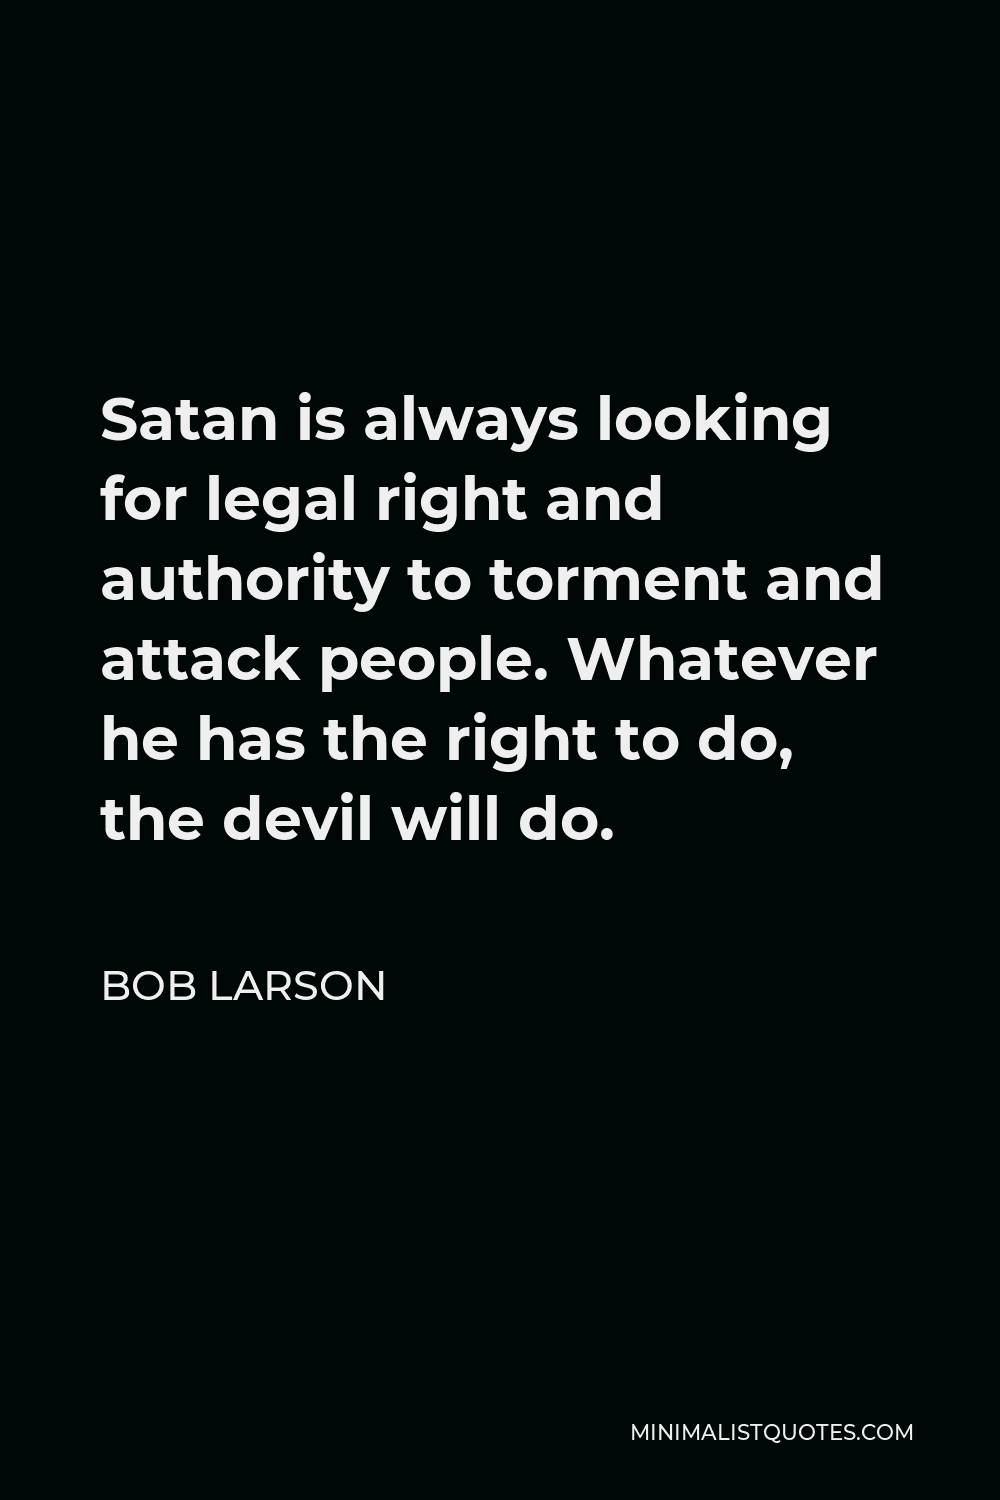 Bob Larson Quote - Satan is always looking for legal right and authority to torment and attack people. Whatever he has the right to do, the devil will do.